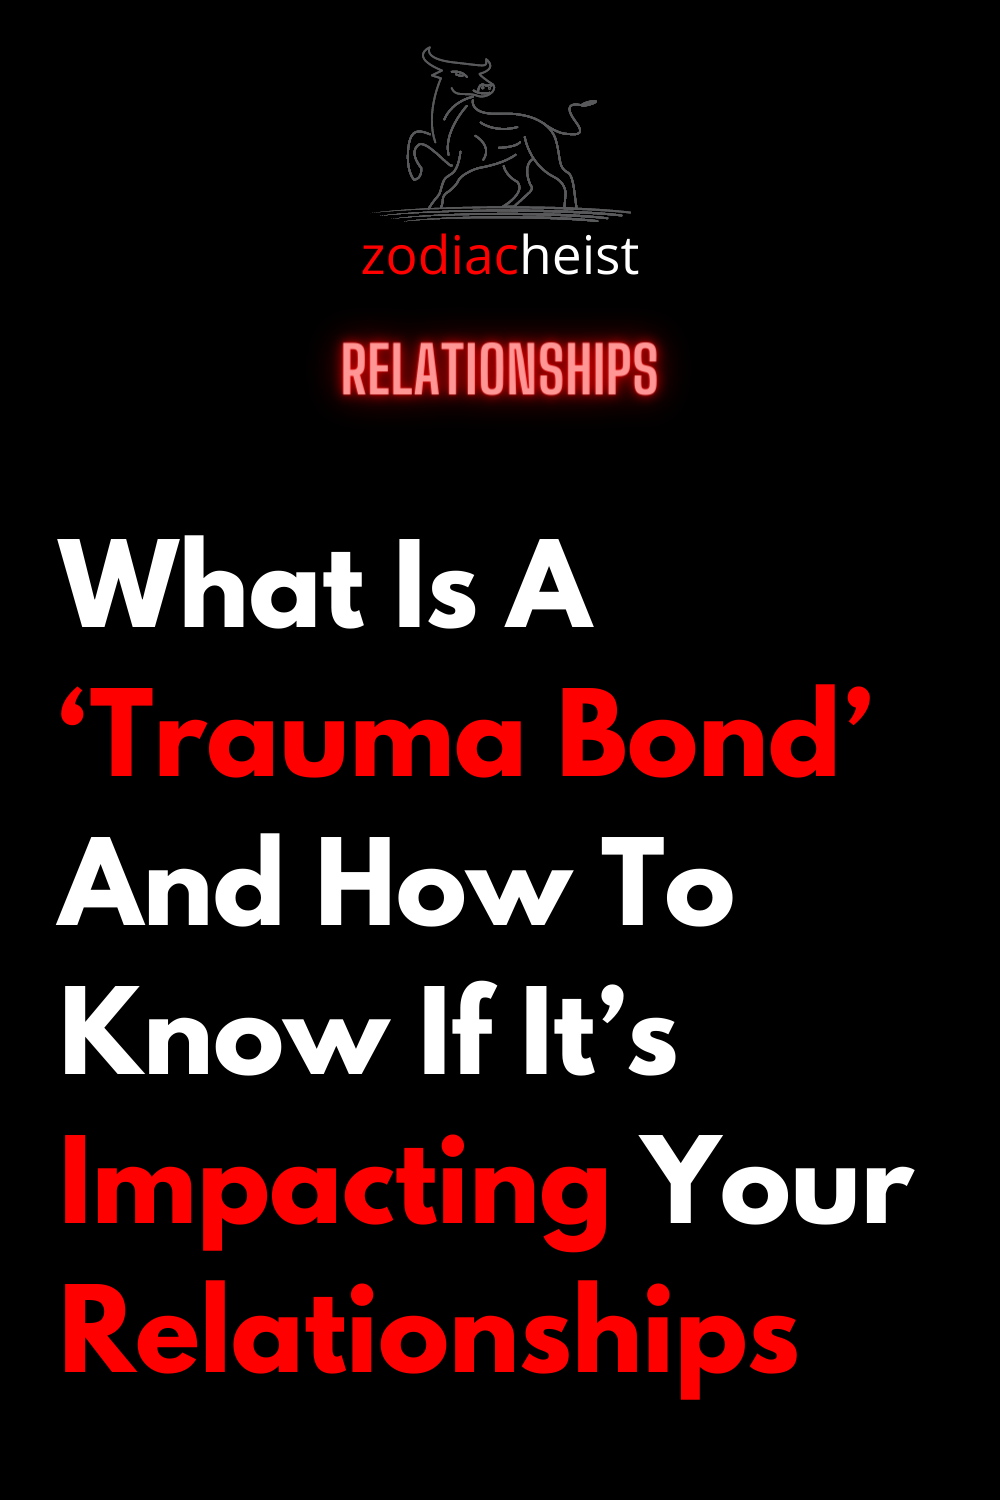 What Is A ‘Trauma Bond’ And How To Know If It’s Impacting Your Relationships